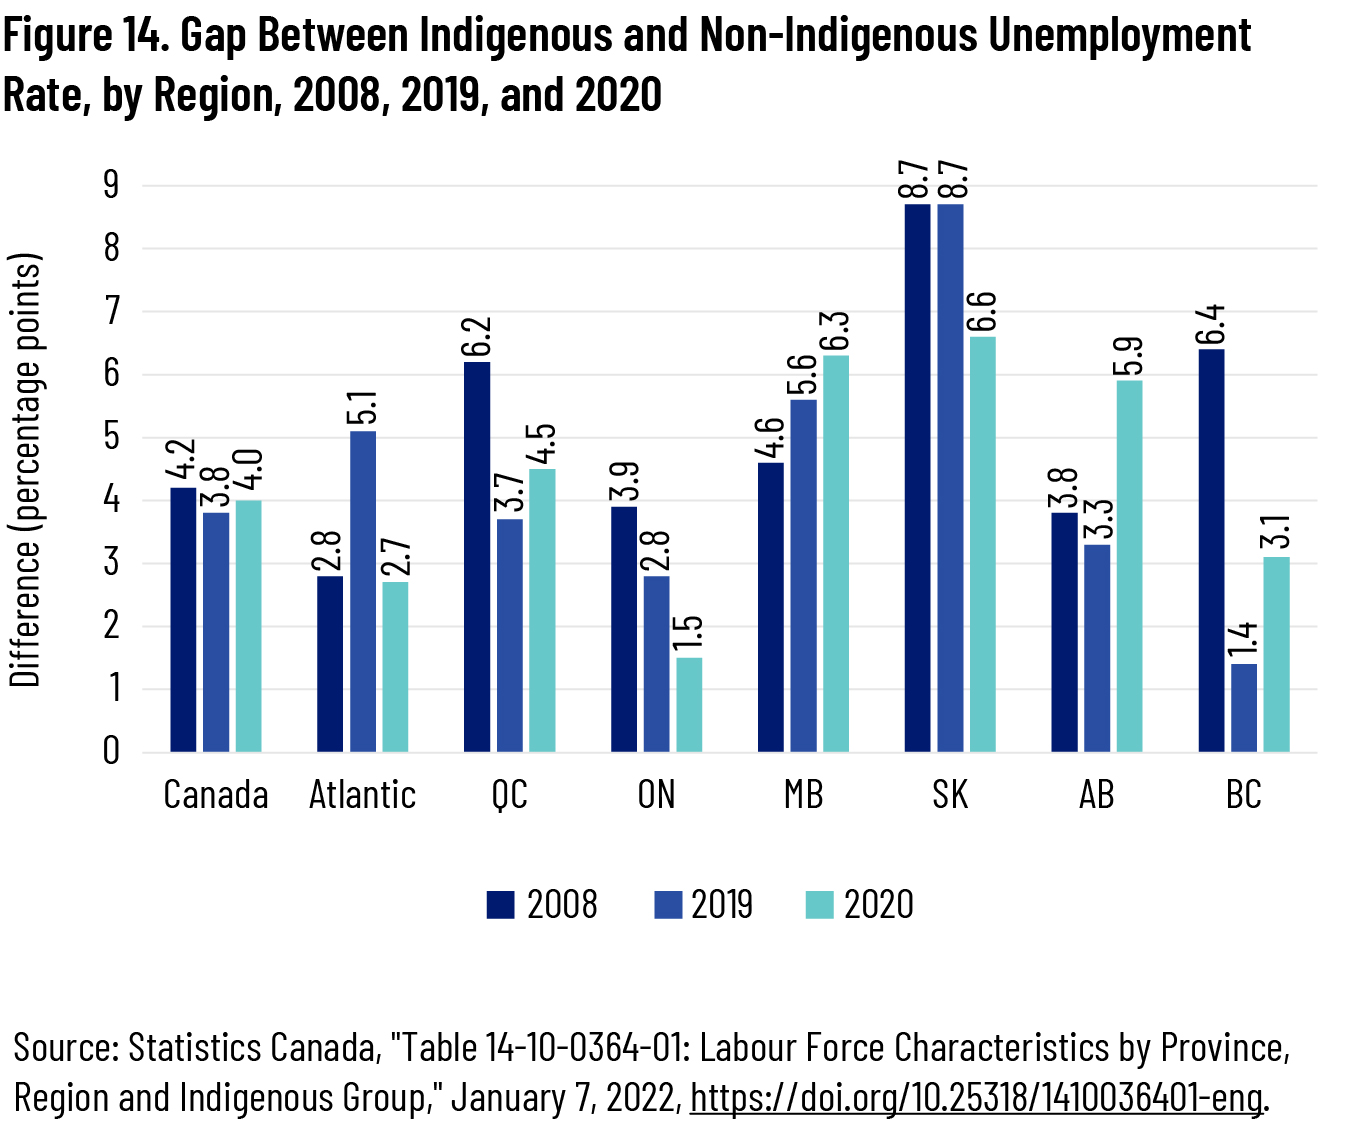 Figure 14. Gap Between Indigenous and Non-Indigenous Unemployment Rate, by Region, 2008, 2019, and 2020